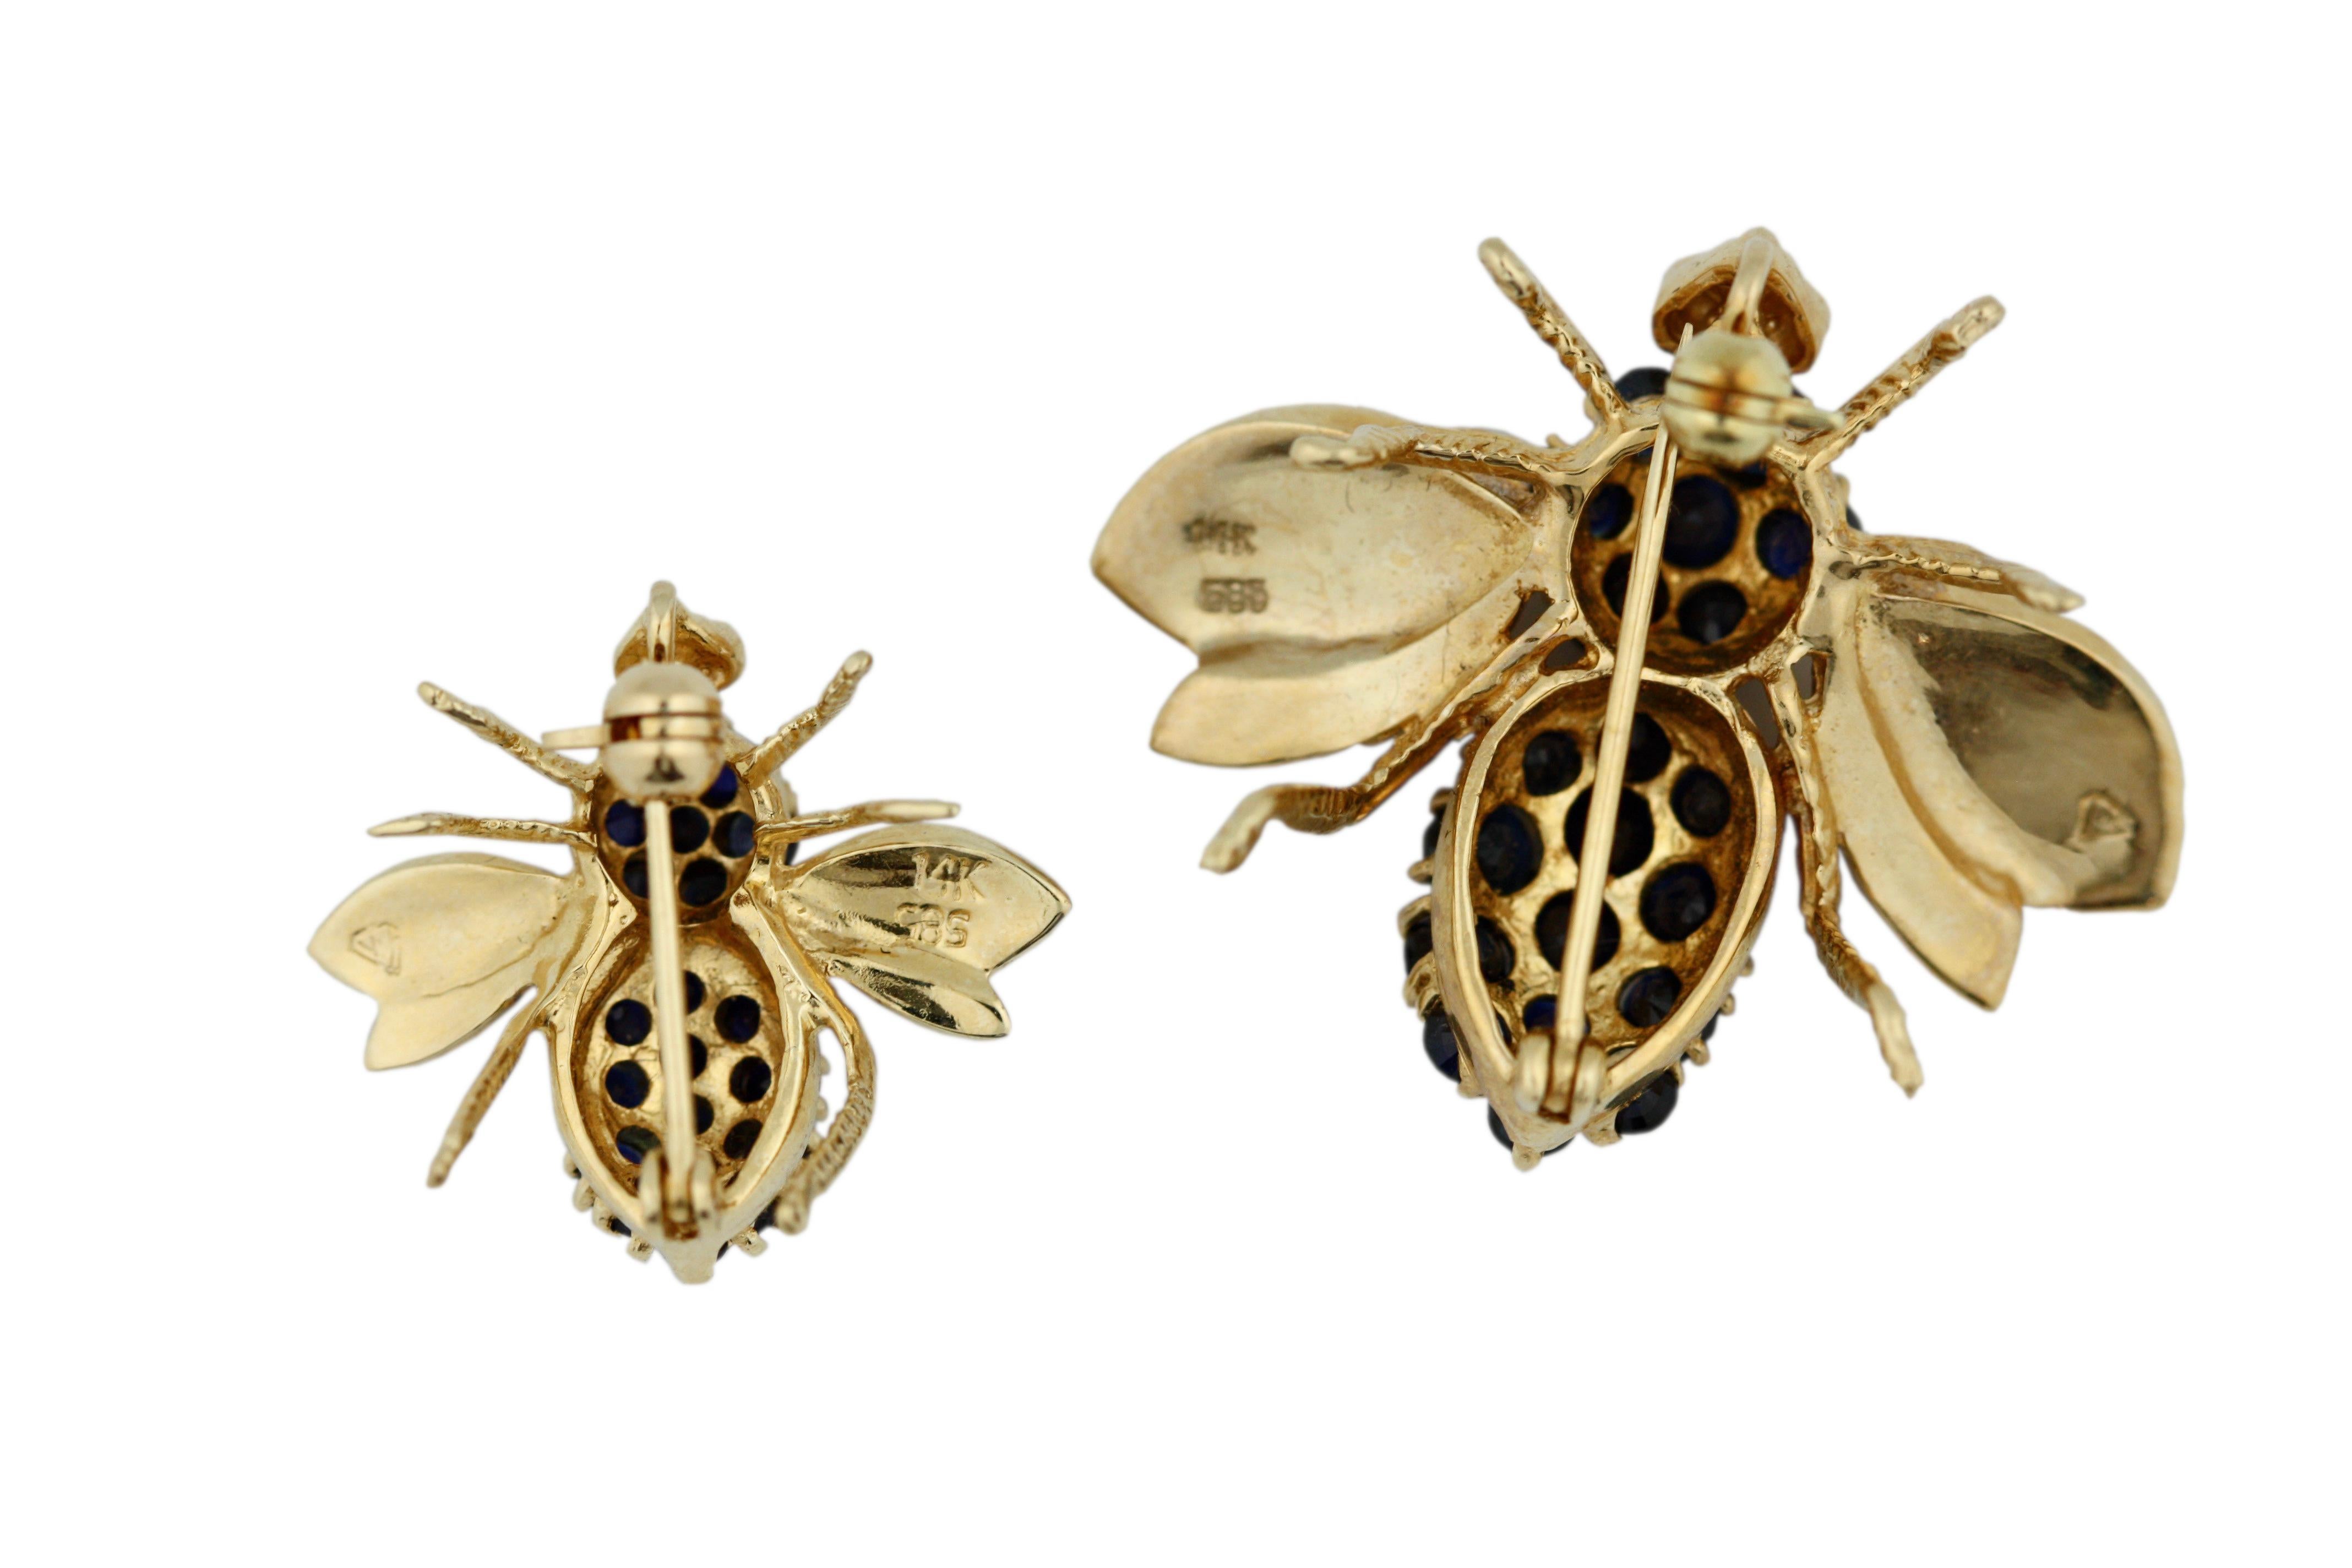 Two 14 Karat Gold and Gem-Set Bee Brooches, Designed as Bees 1